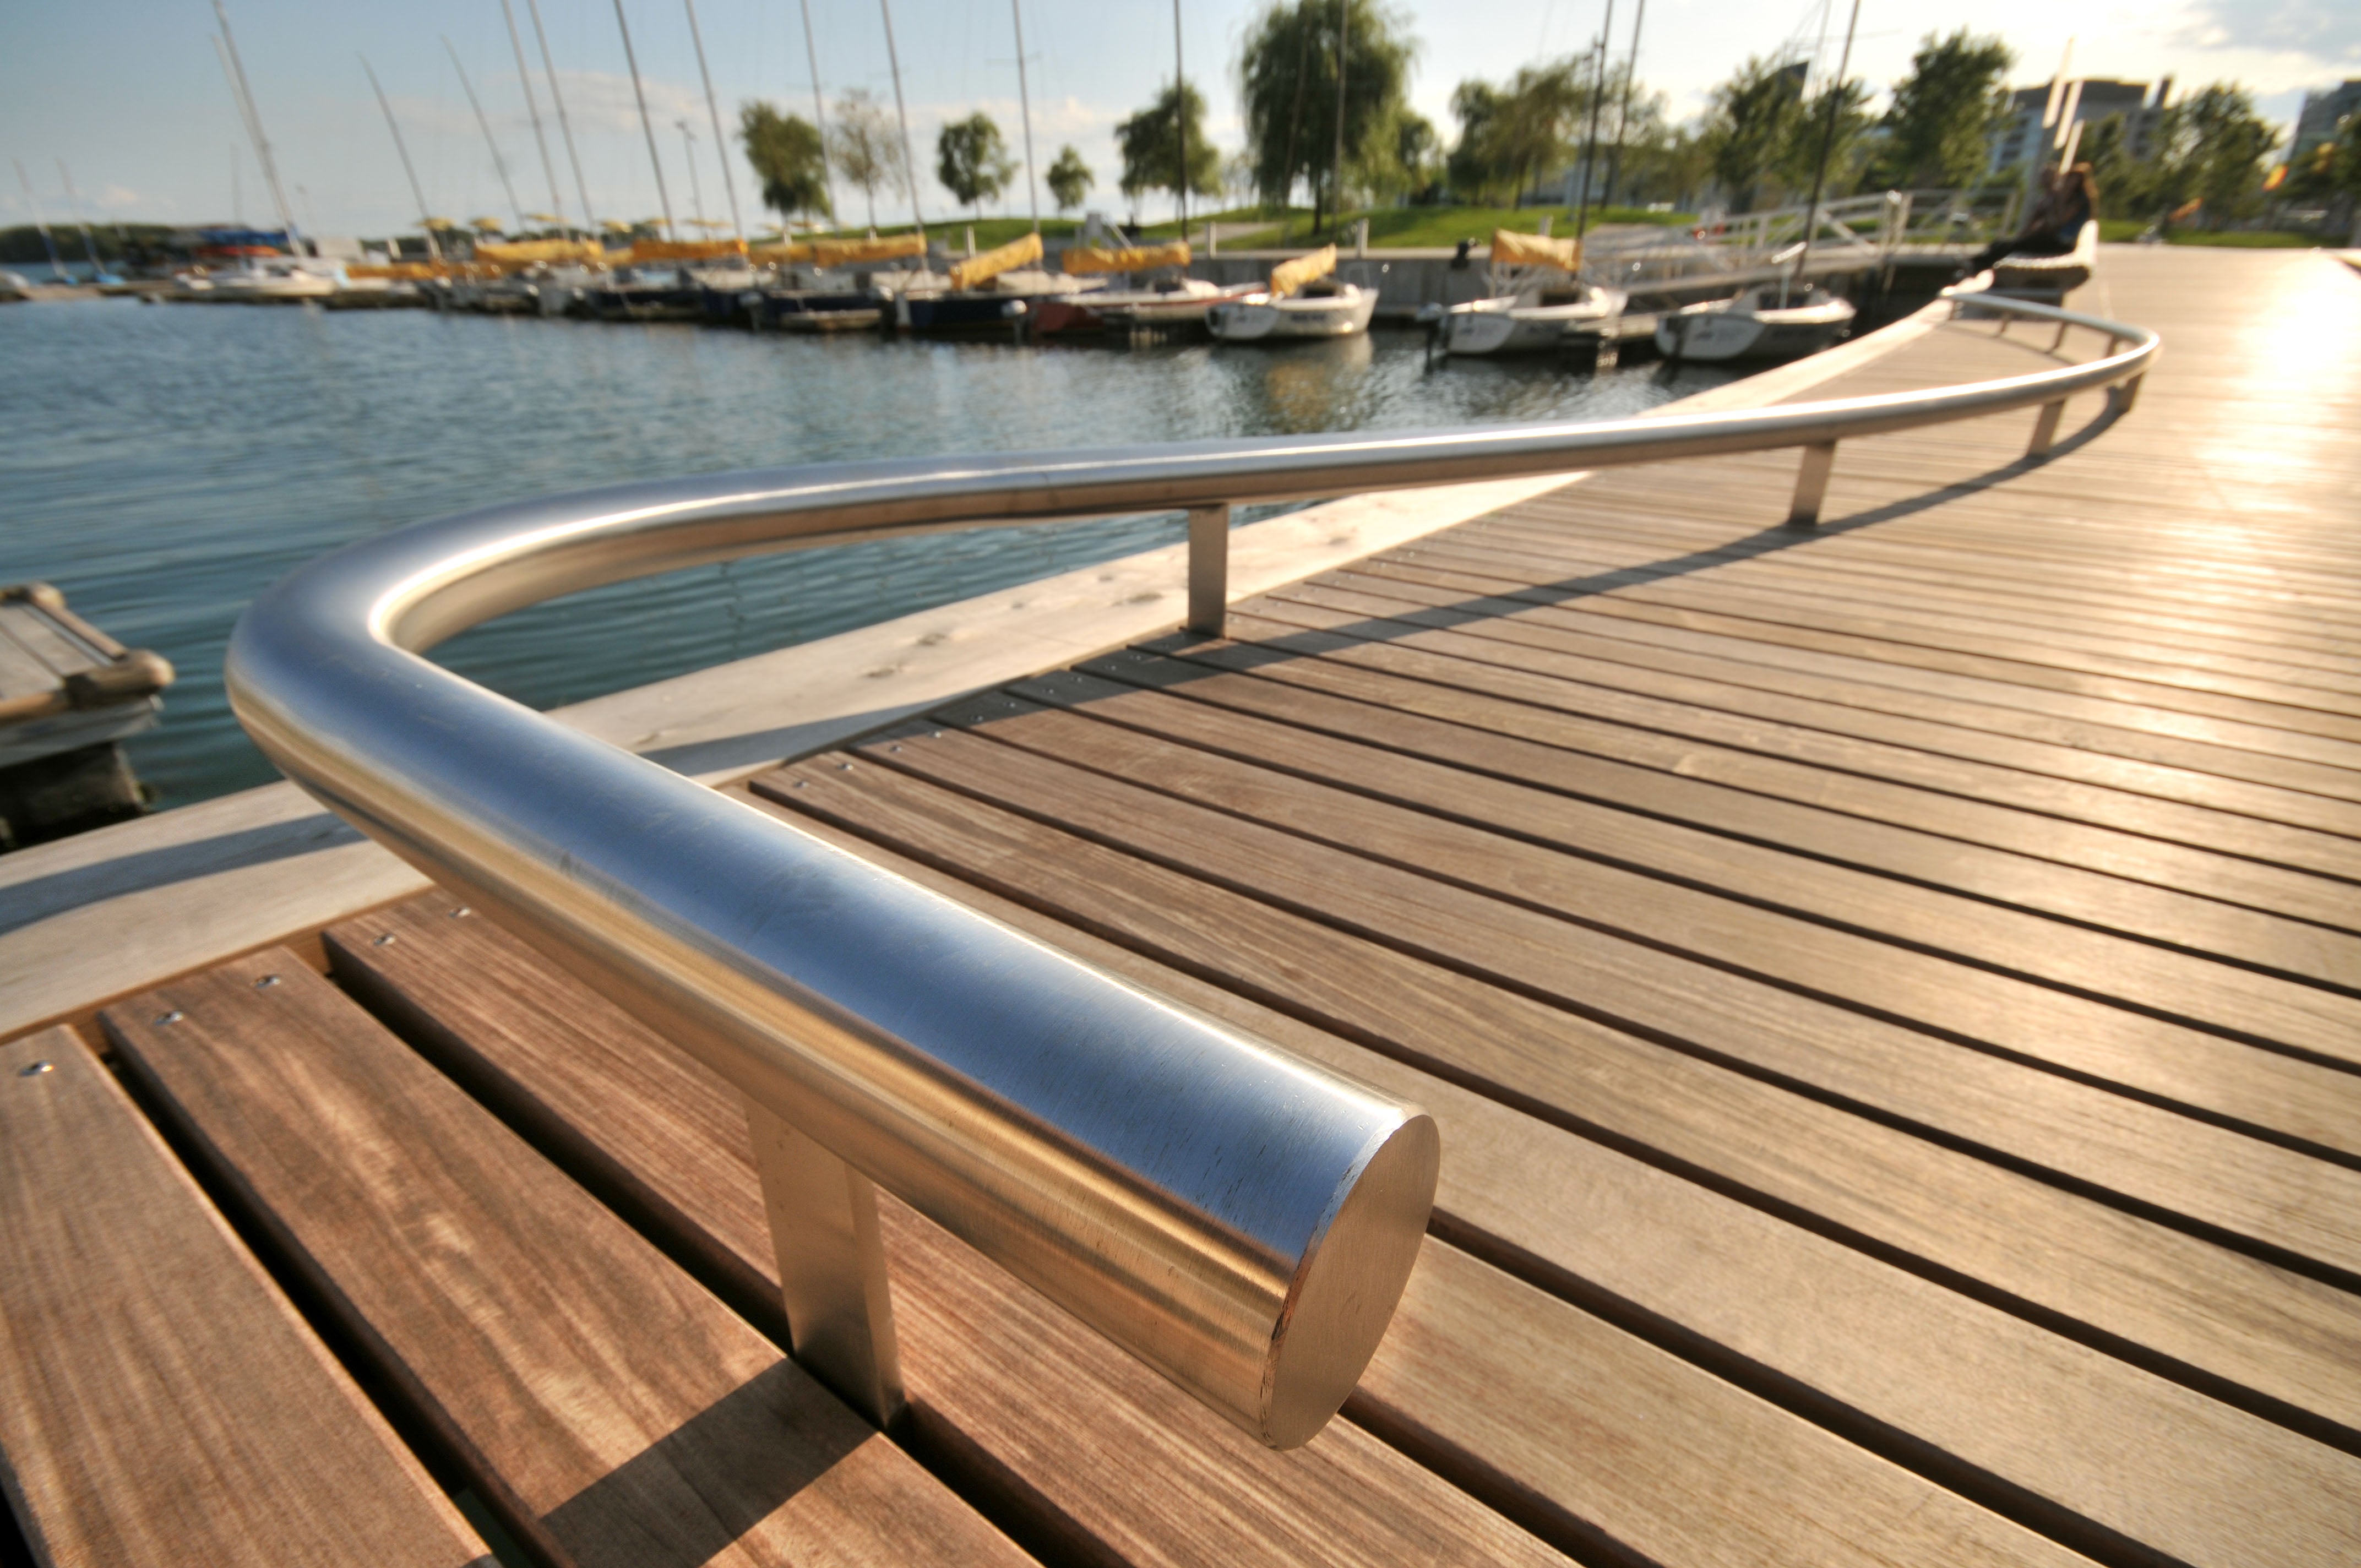 close up view showing the curved railing of a WaveDeck with a park in the background